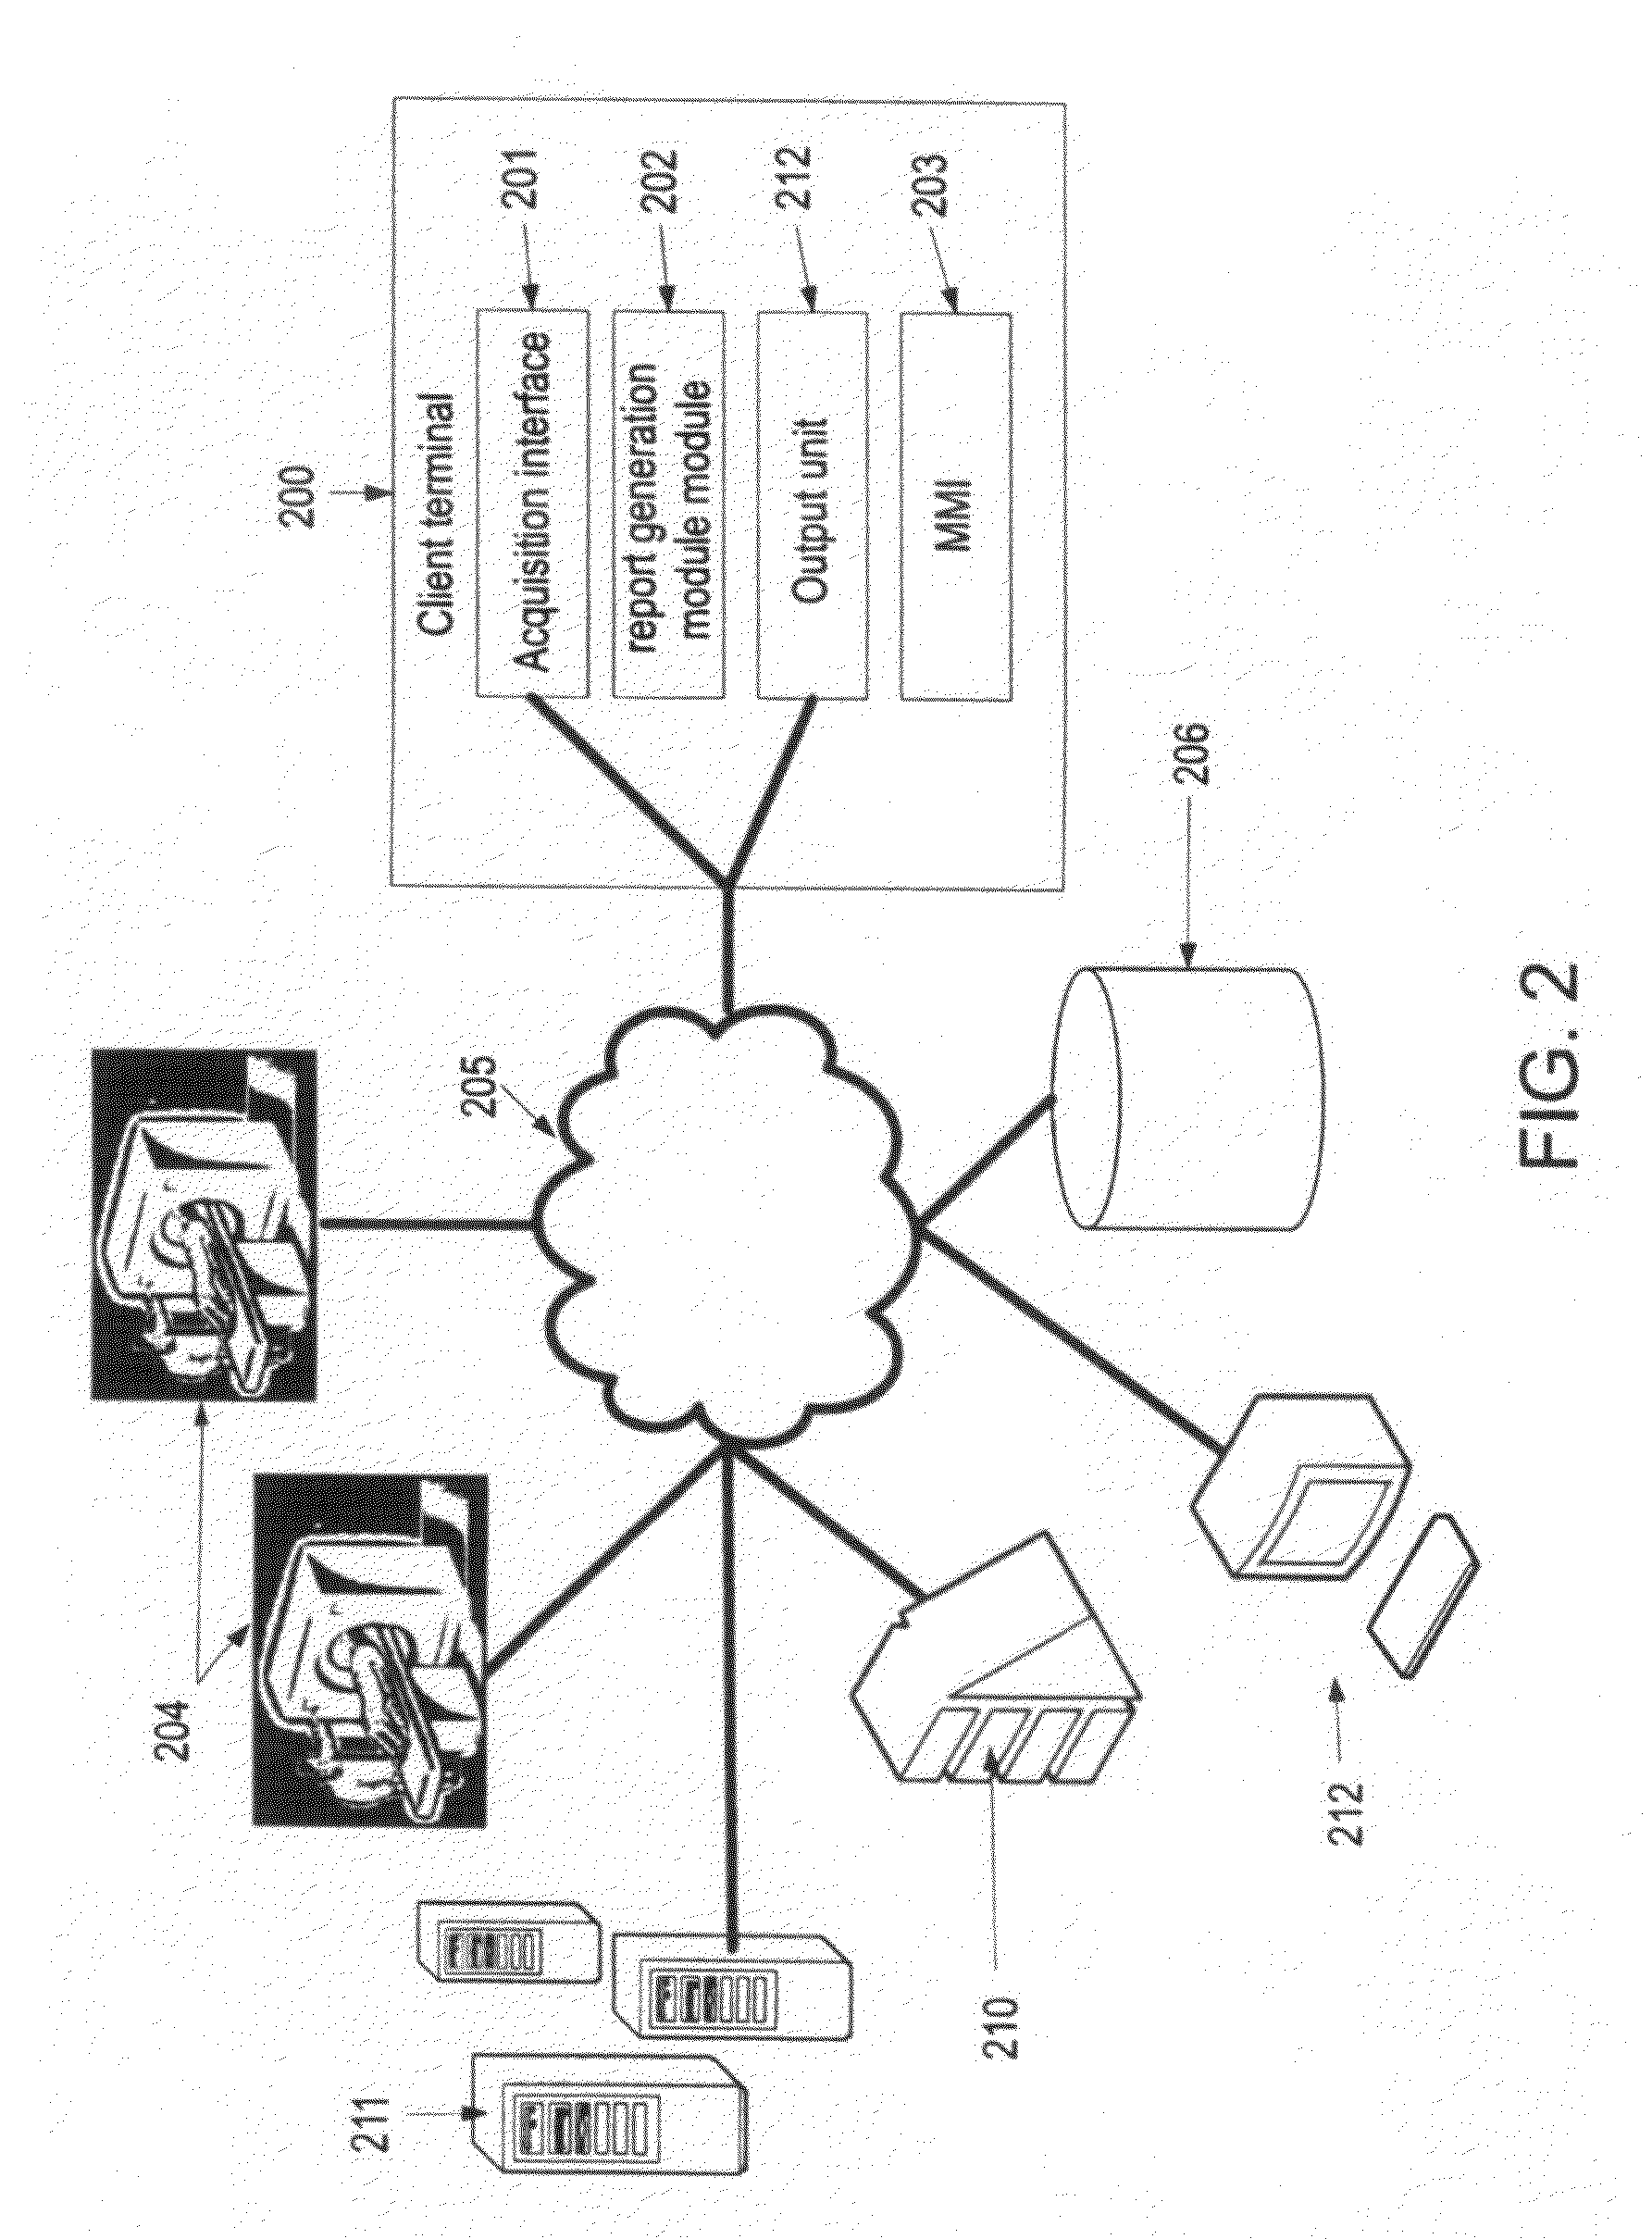 Method and system for medical imaging reporting